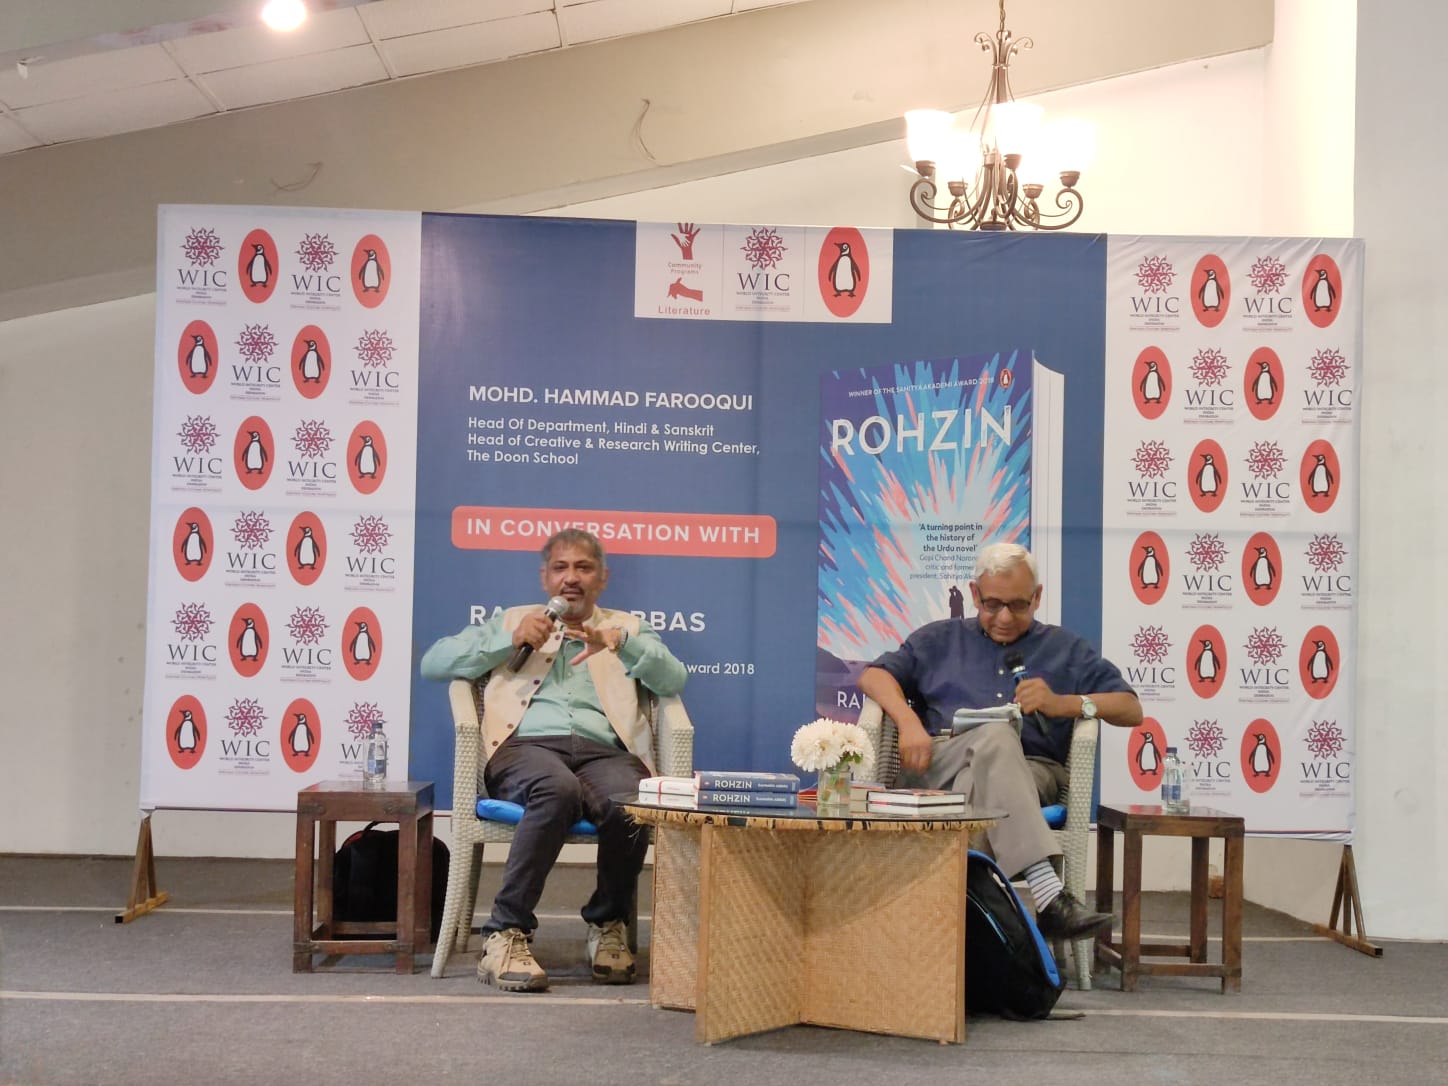 You are currently viewing WIC India, Dehradun Hosted Book Reading and Discussion of ‘Rohzin by Rahman Abbas’.